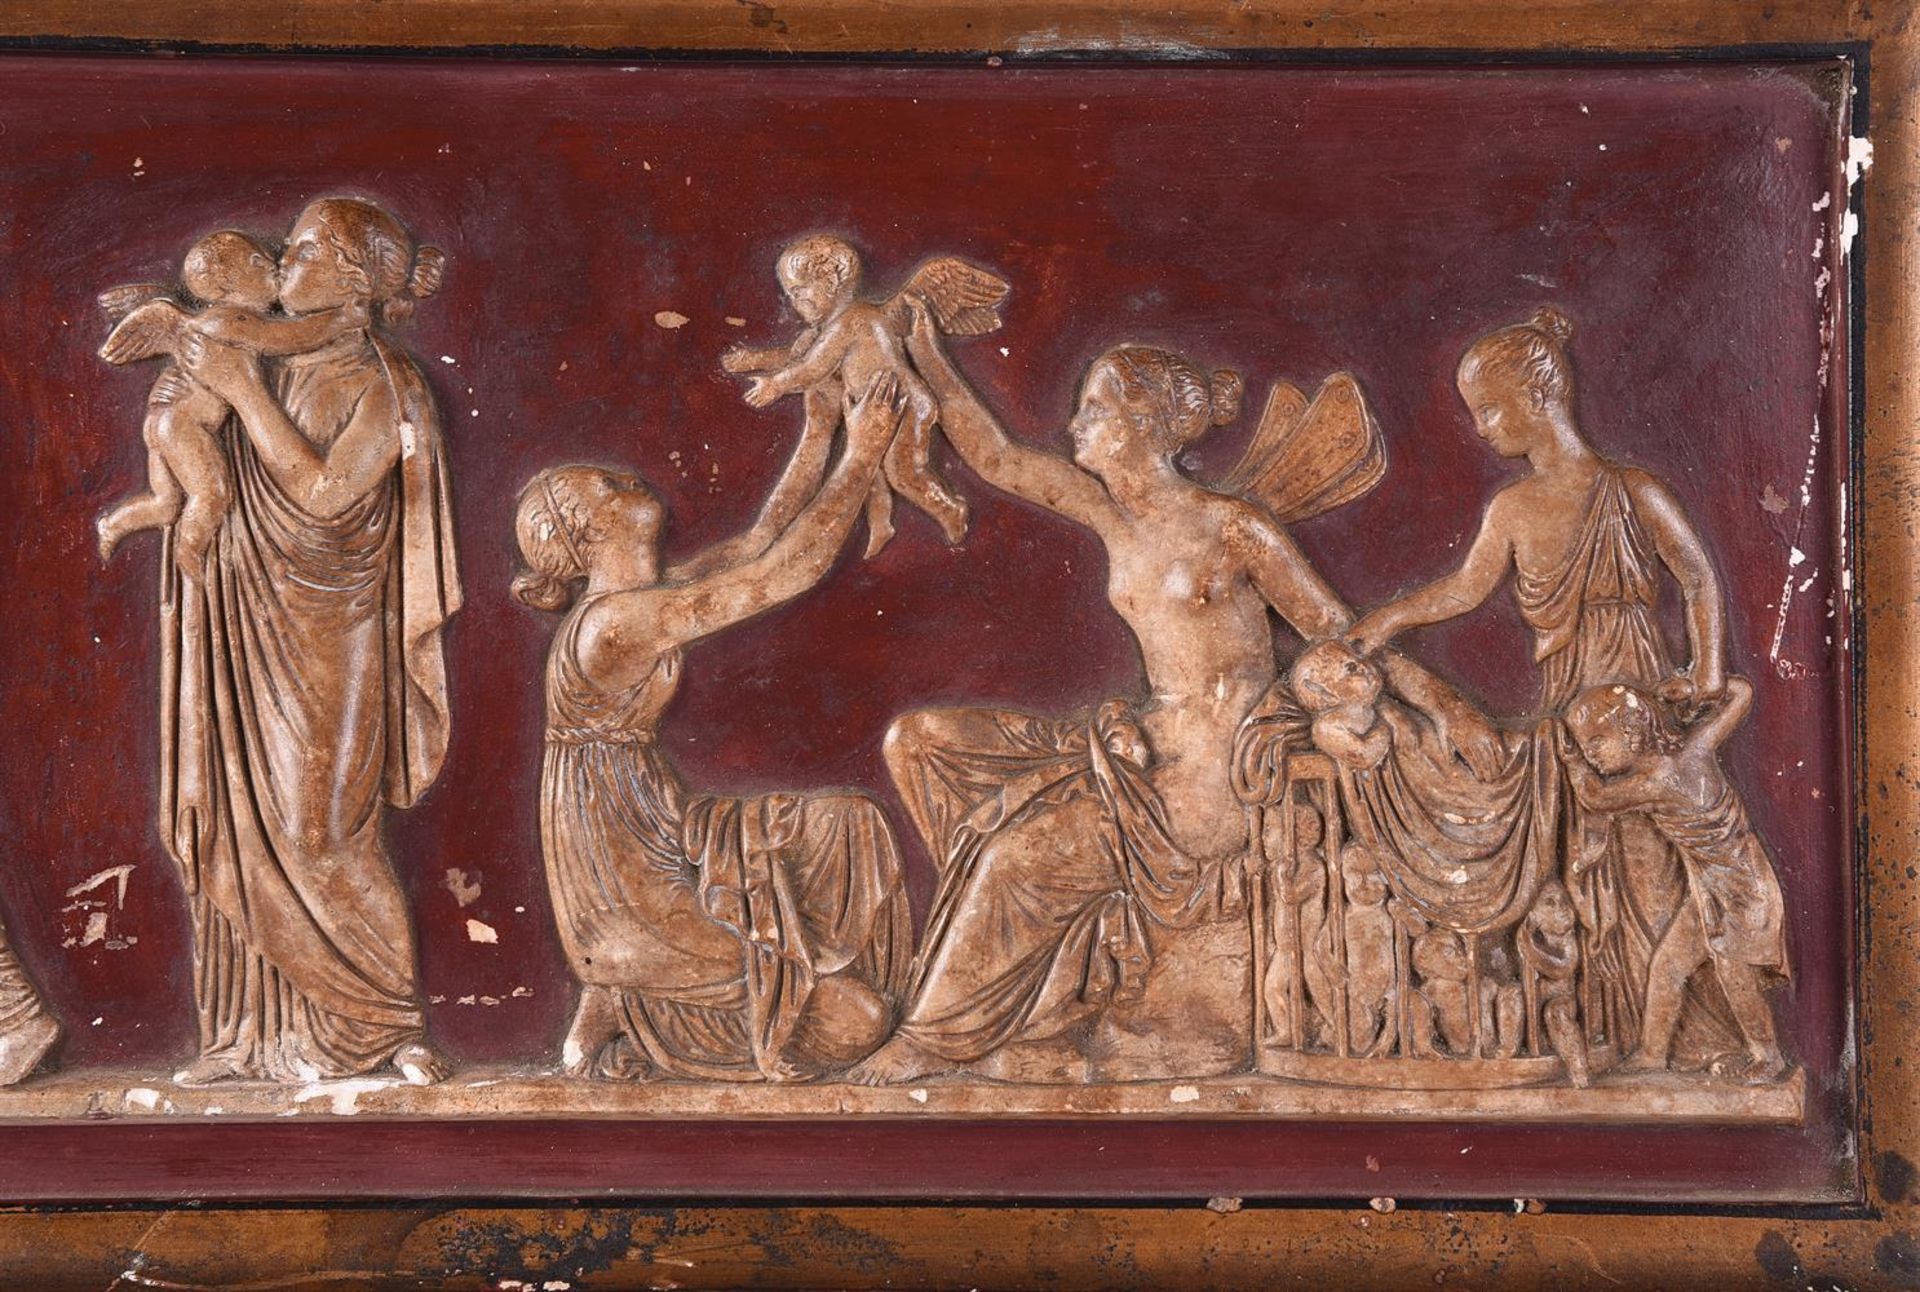 AFTER THORVALDSEN, A PLASTER FRIEZE 'THE AGES OF LOVE', LATE 19TH CENTURY, DANISH - Image 2 of 5